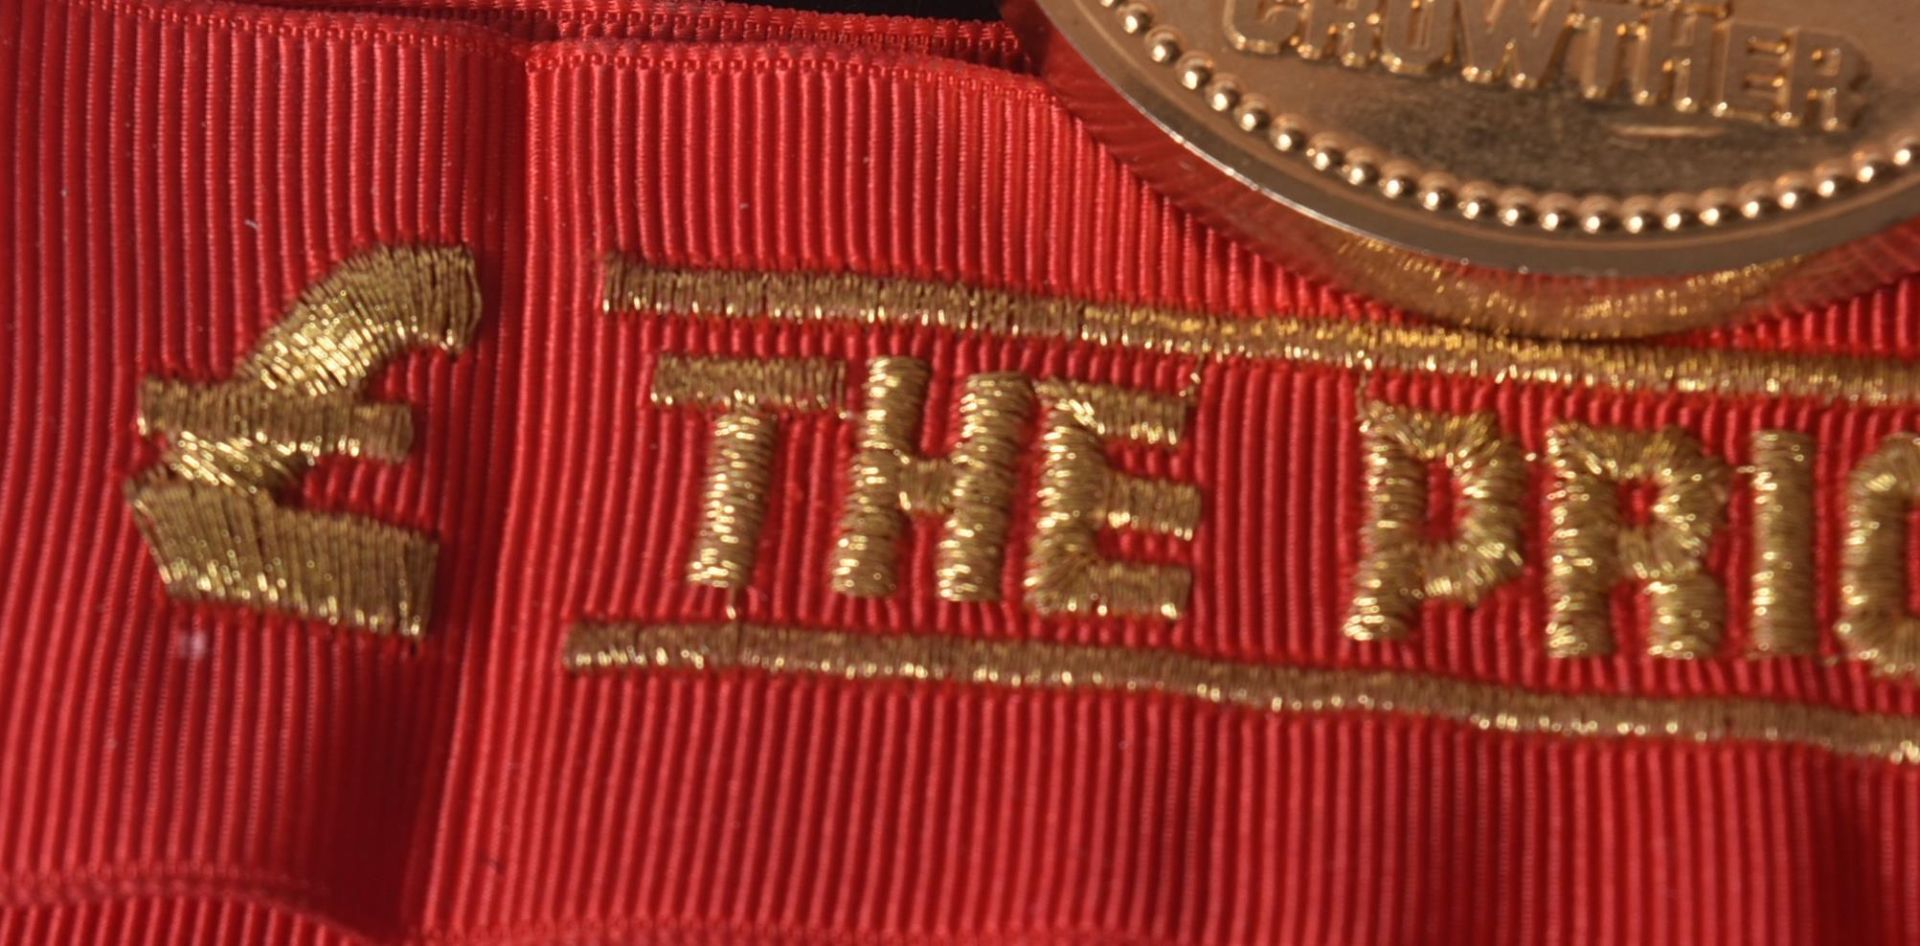 THE PRICE IS RIGHT (1984-1988 GAME SHOW) - ORIGINAL CONTESTANT MEDAL - Image 5 of 6